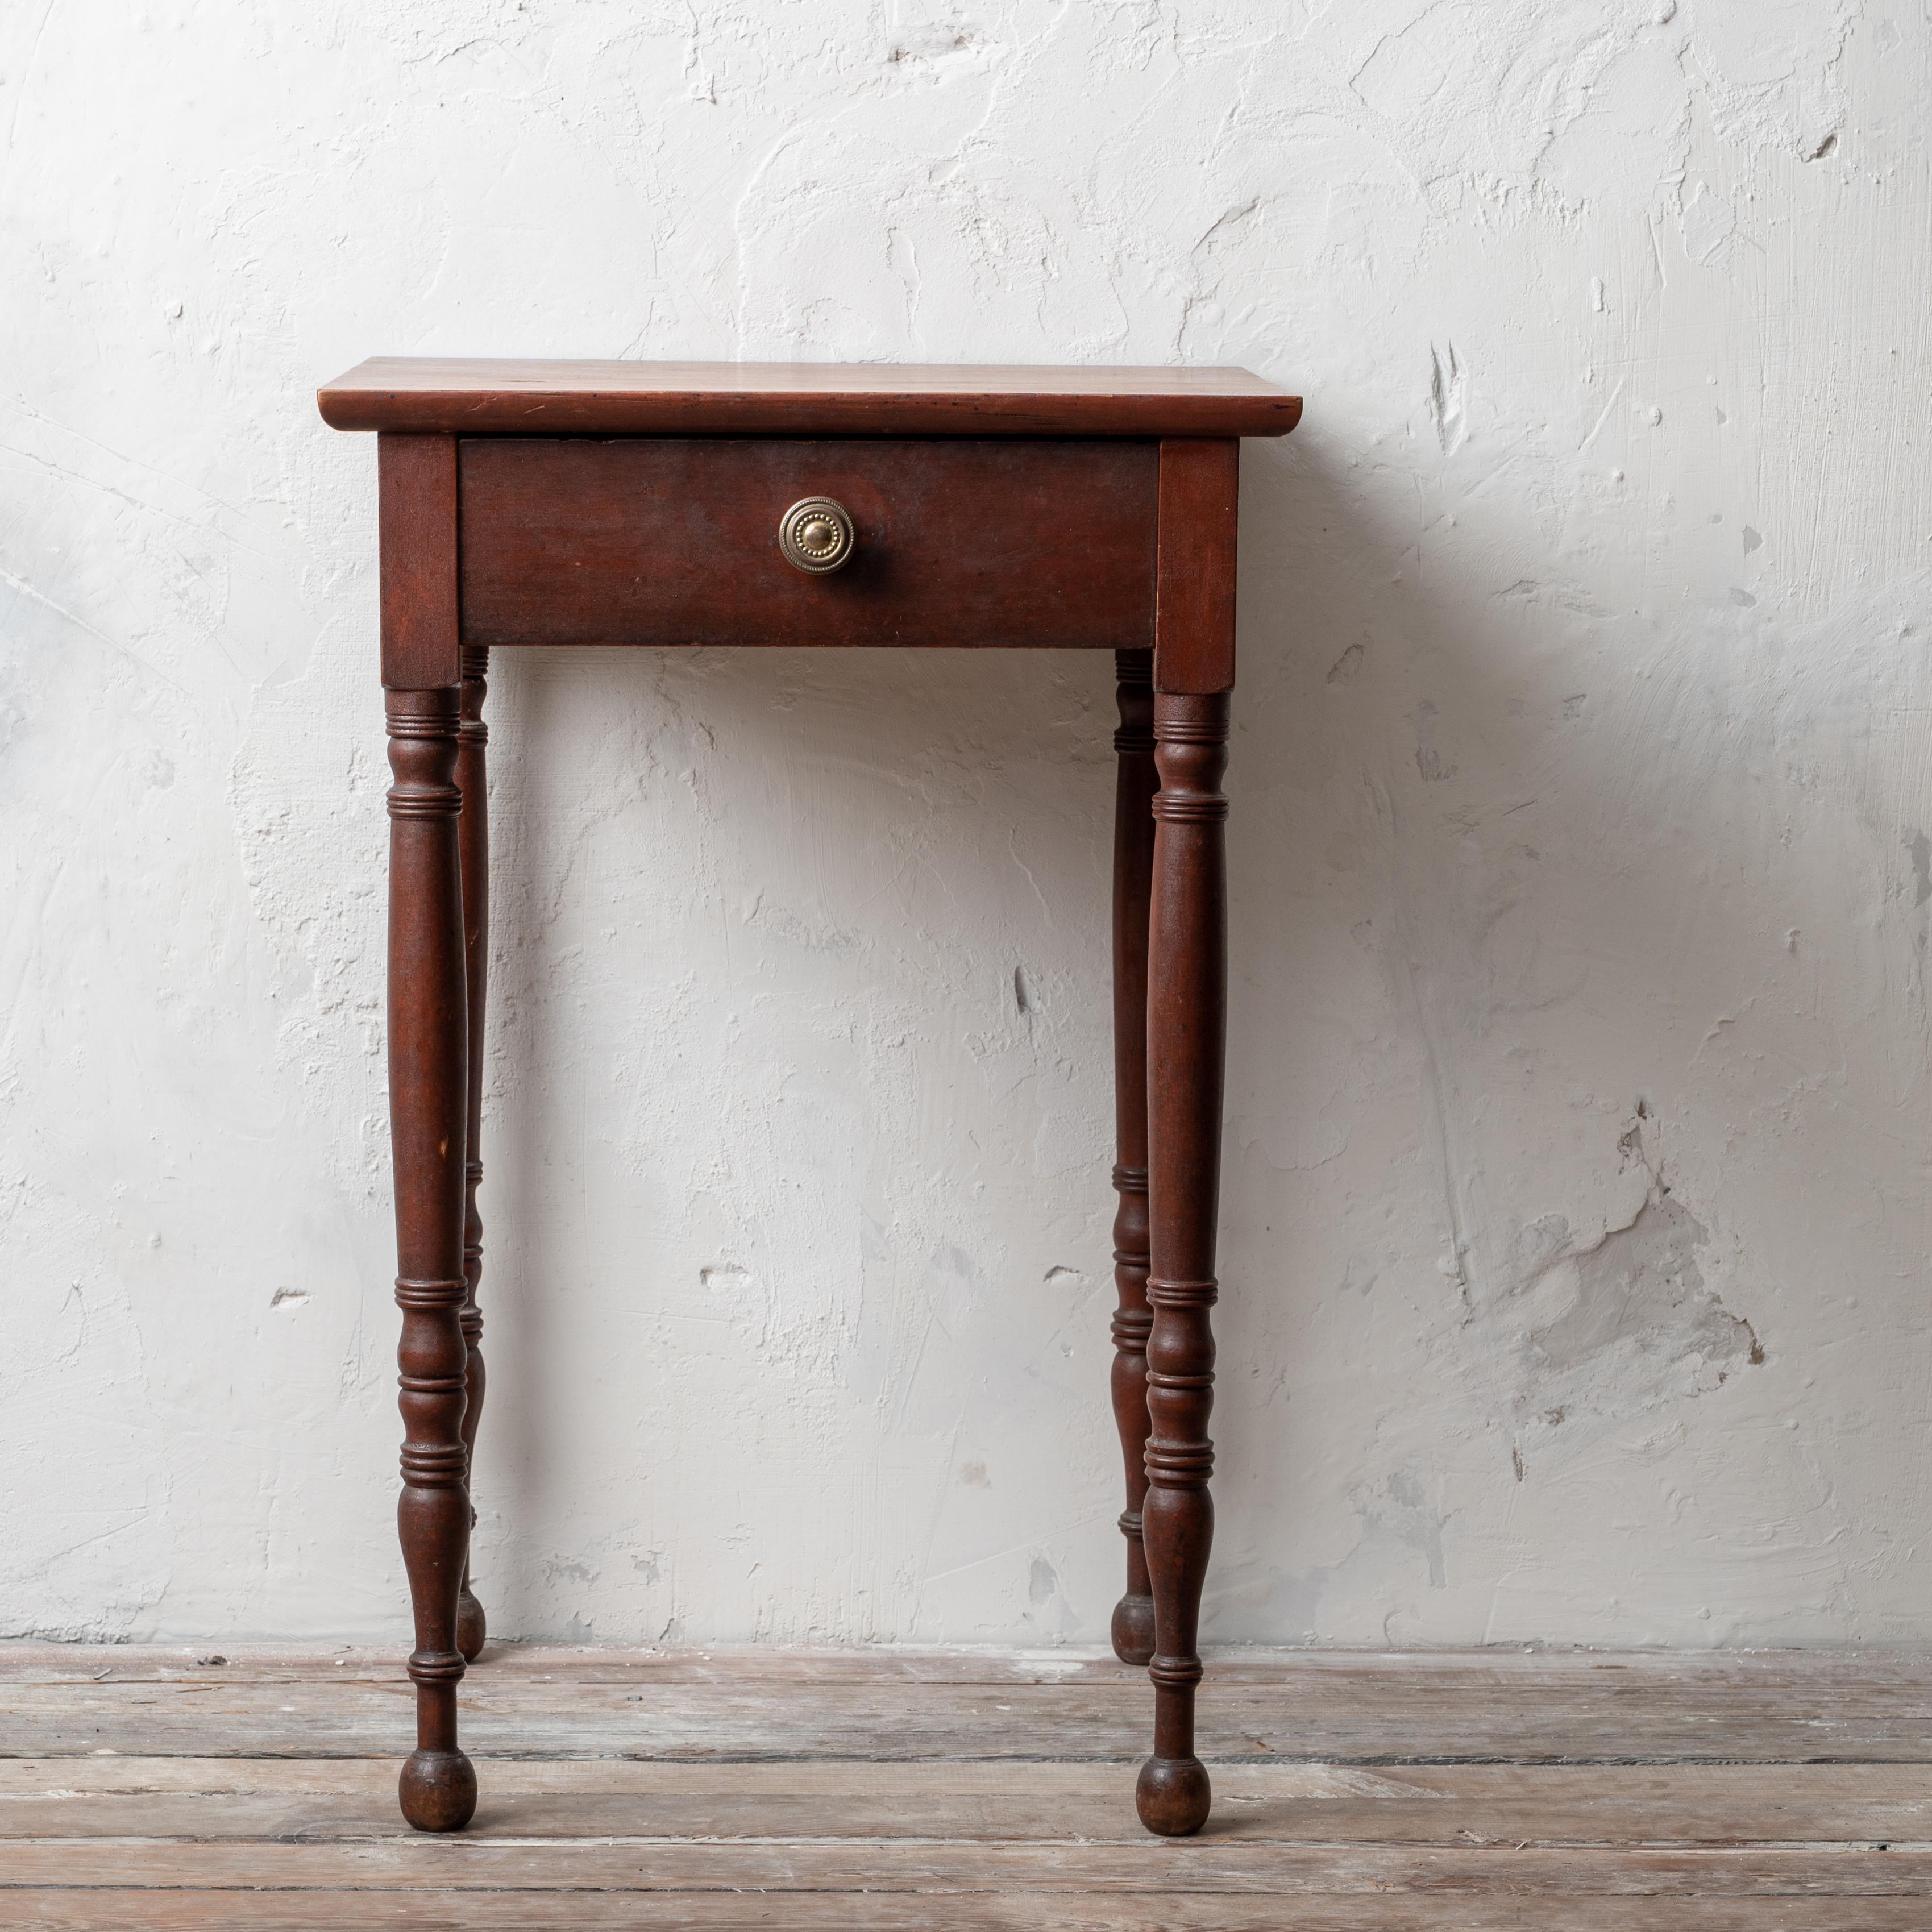 A Sheraton mahogany one drawer stand, American, circa 1810s. 

18 ¾ inches wide by 17 ¾ inches deep by 28 ¼ inches tall

